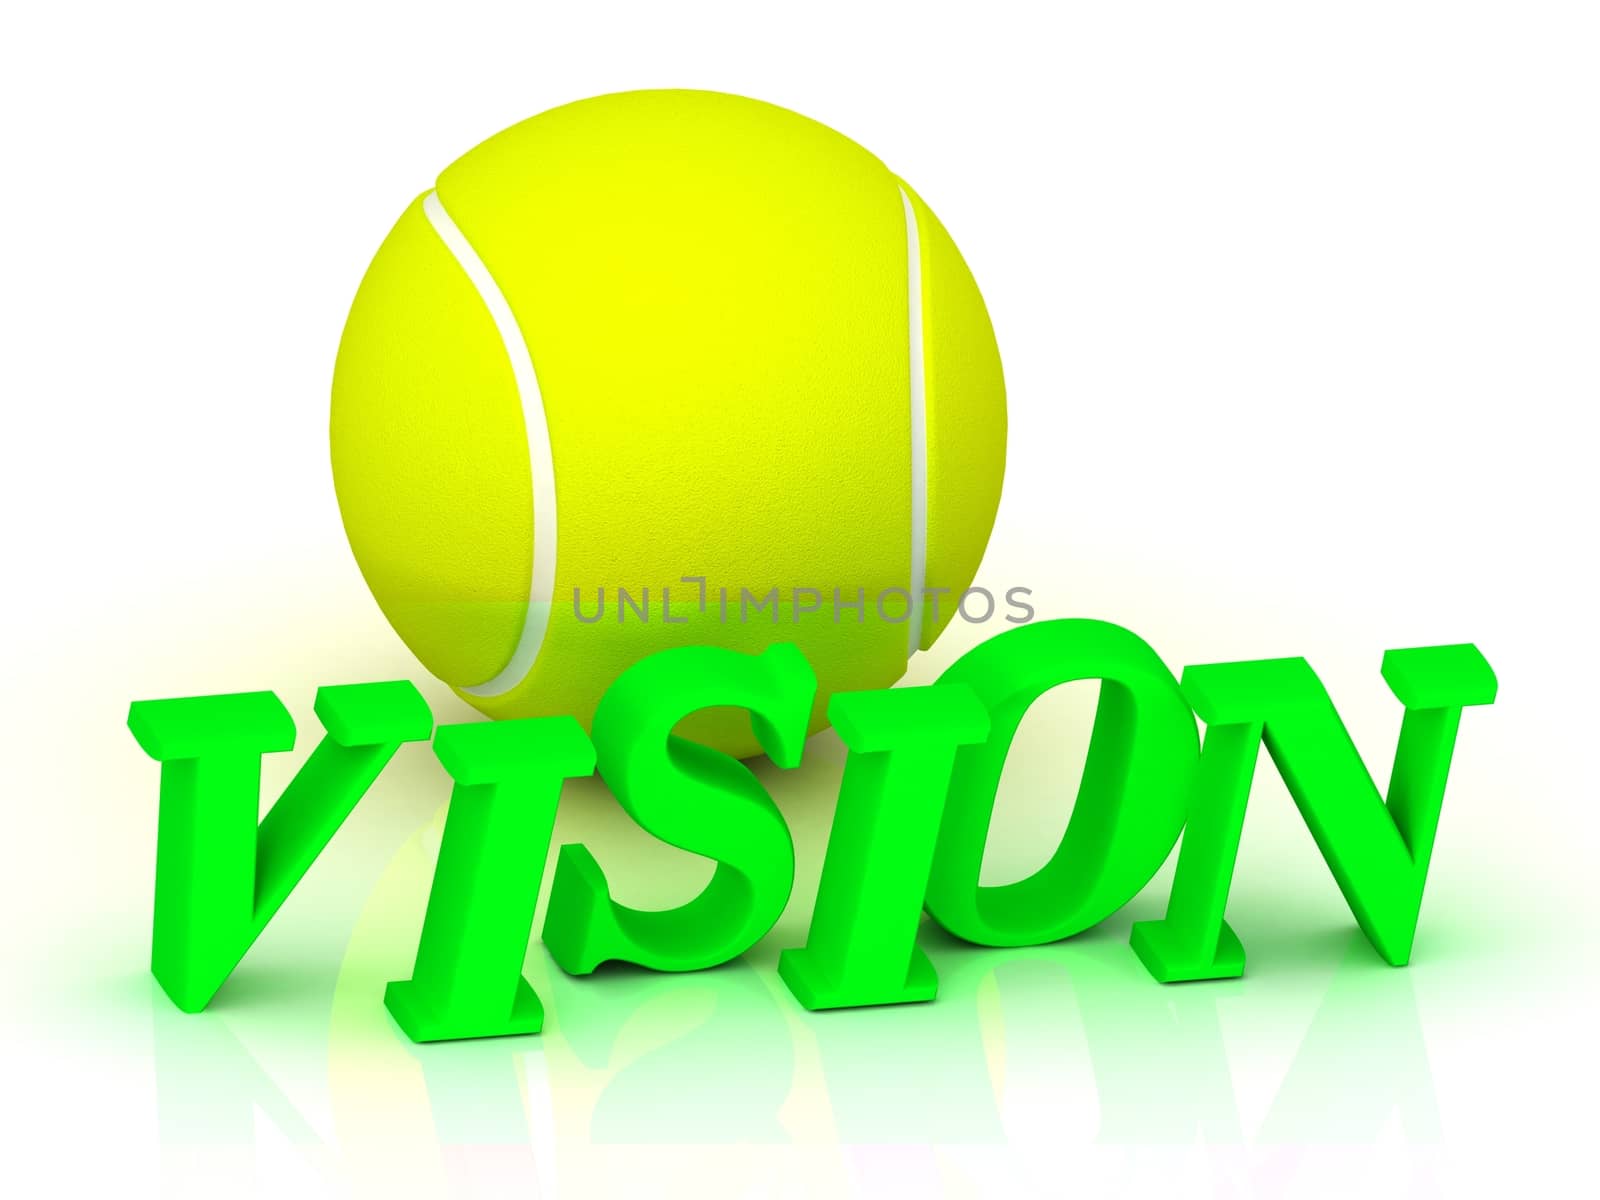 VISION - bright green letters and a yellow tennis ball on a white background